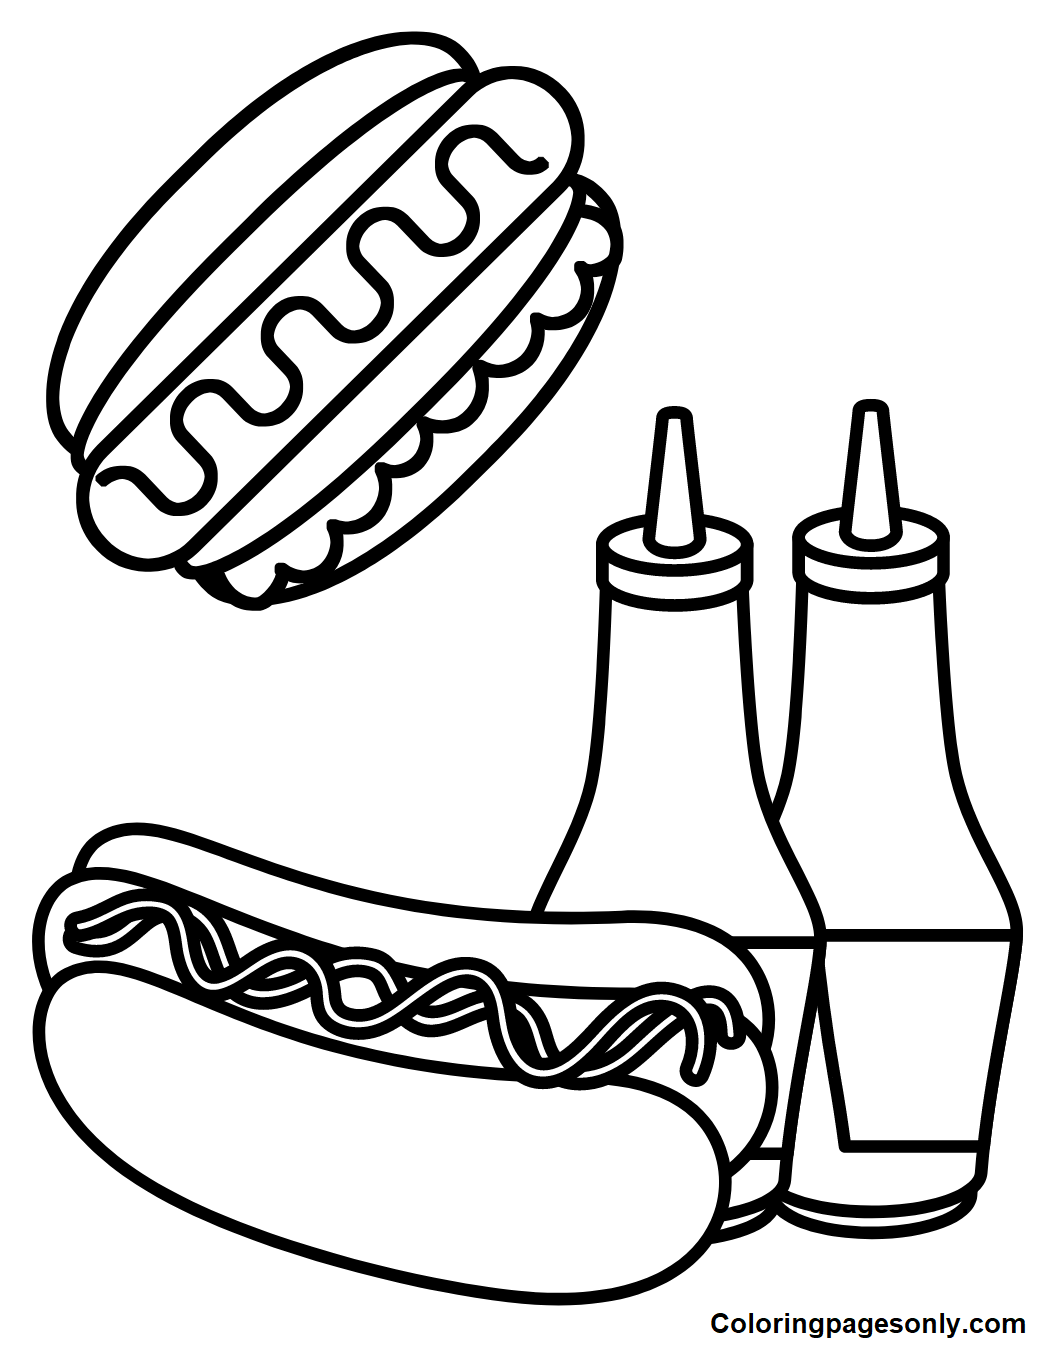 Hot Dogs with Ketchup Bottle Coloring Pages